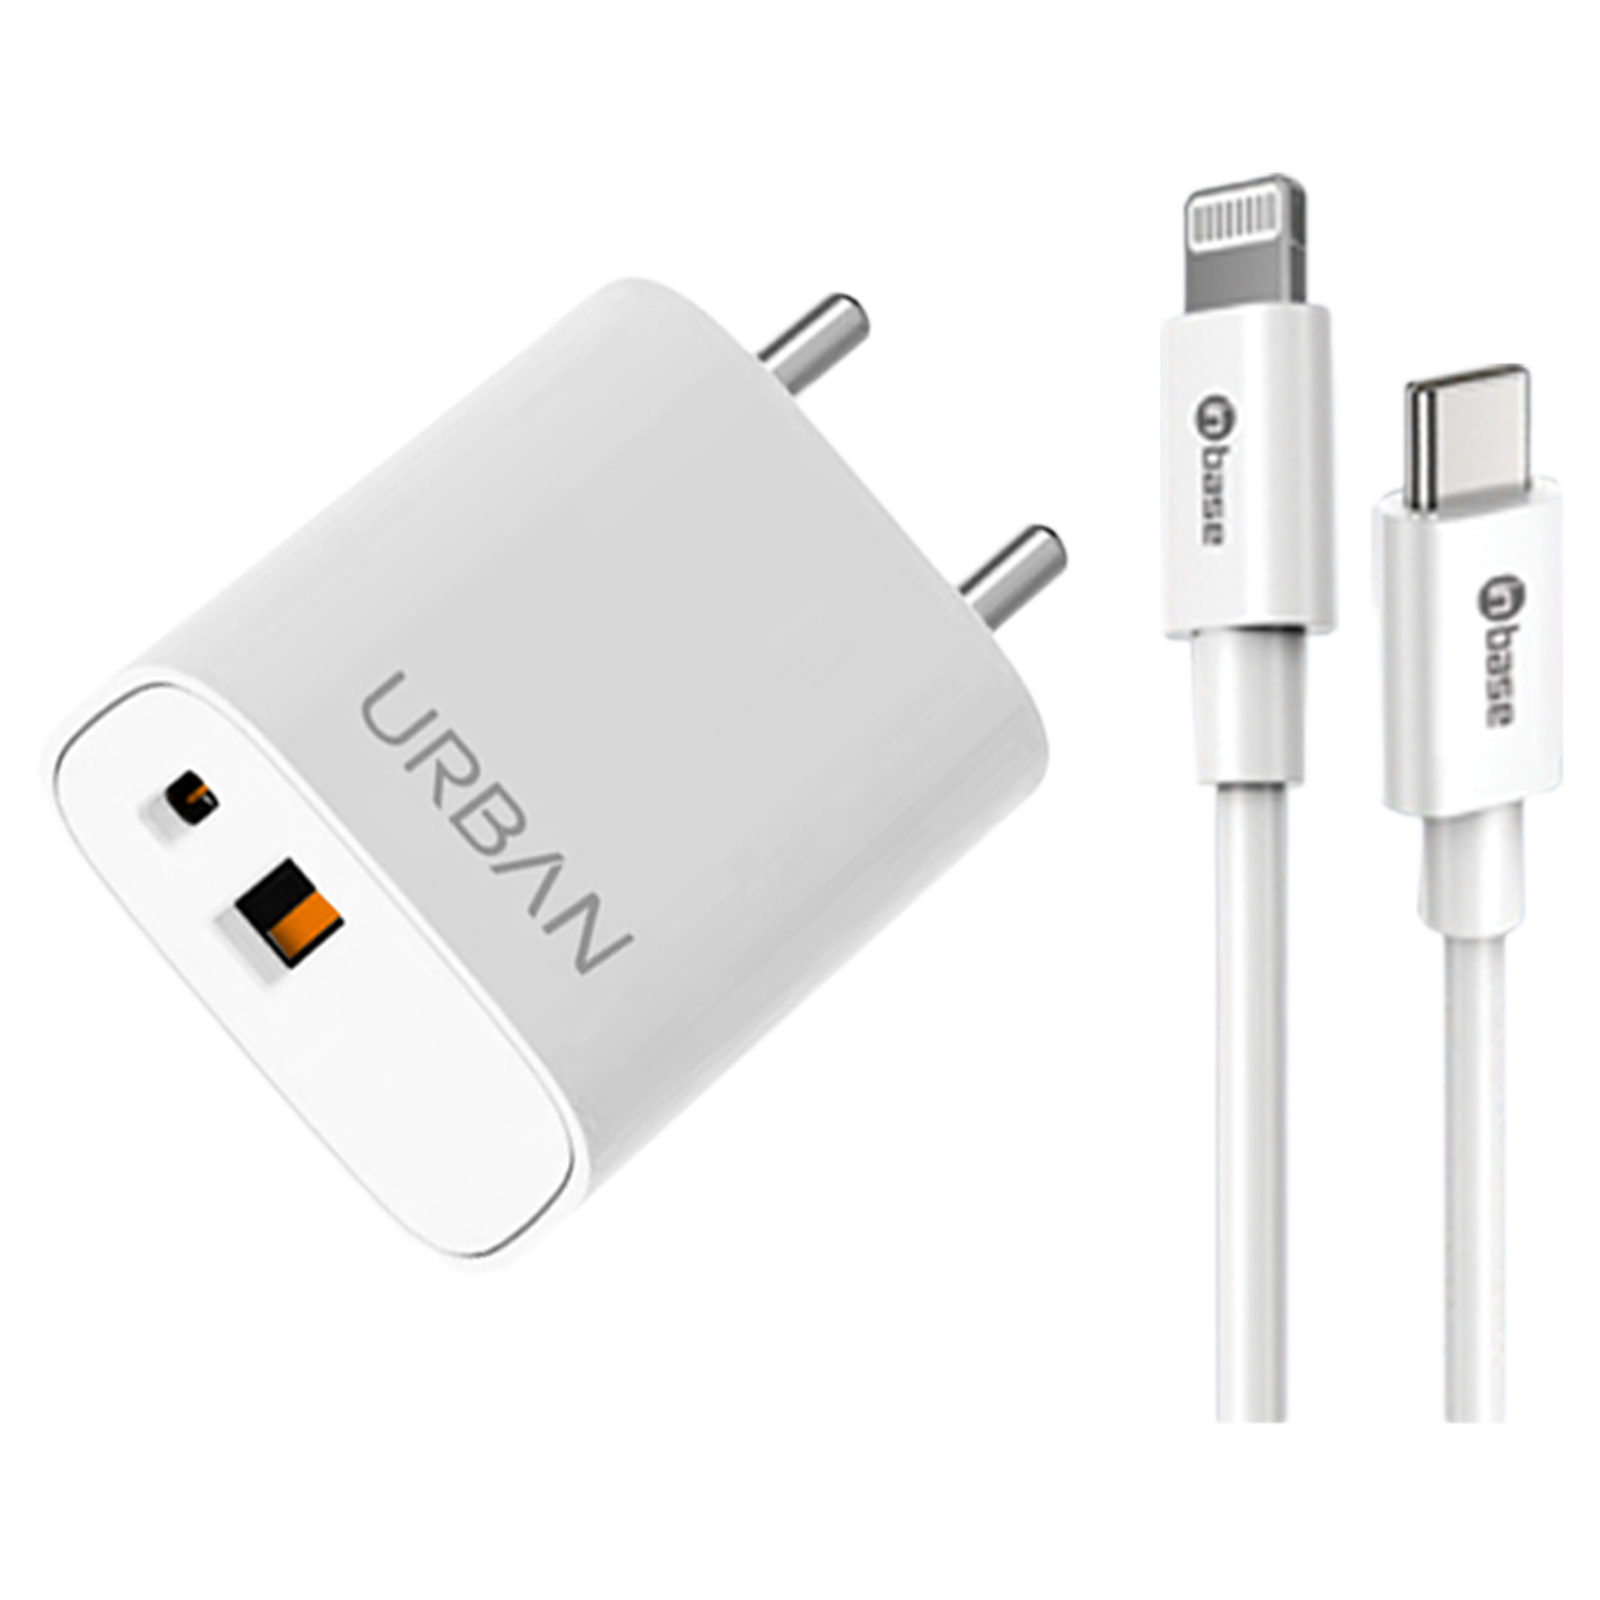 Inbase Urban Sprint 20 Watts 2-Port USB Type-C and PD + QC USB 3.0 Type-A Wall Charging Adapter with Cable (Quick Charging Technology, IB-2046, White)_1